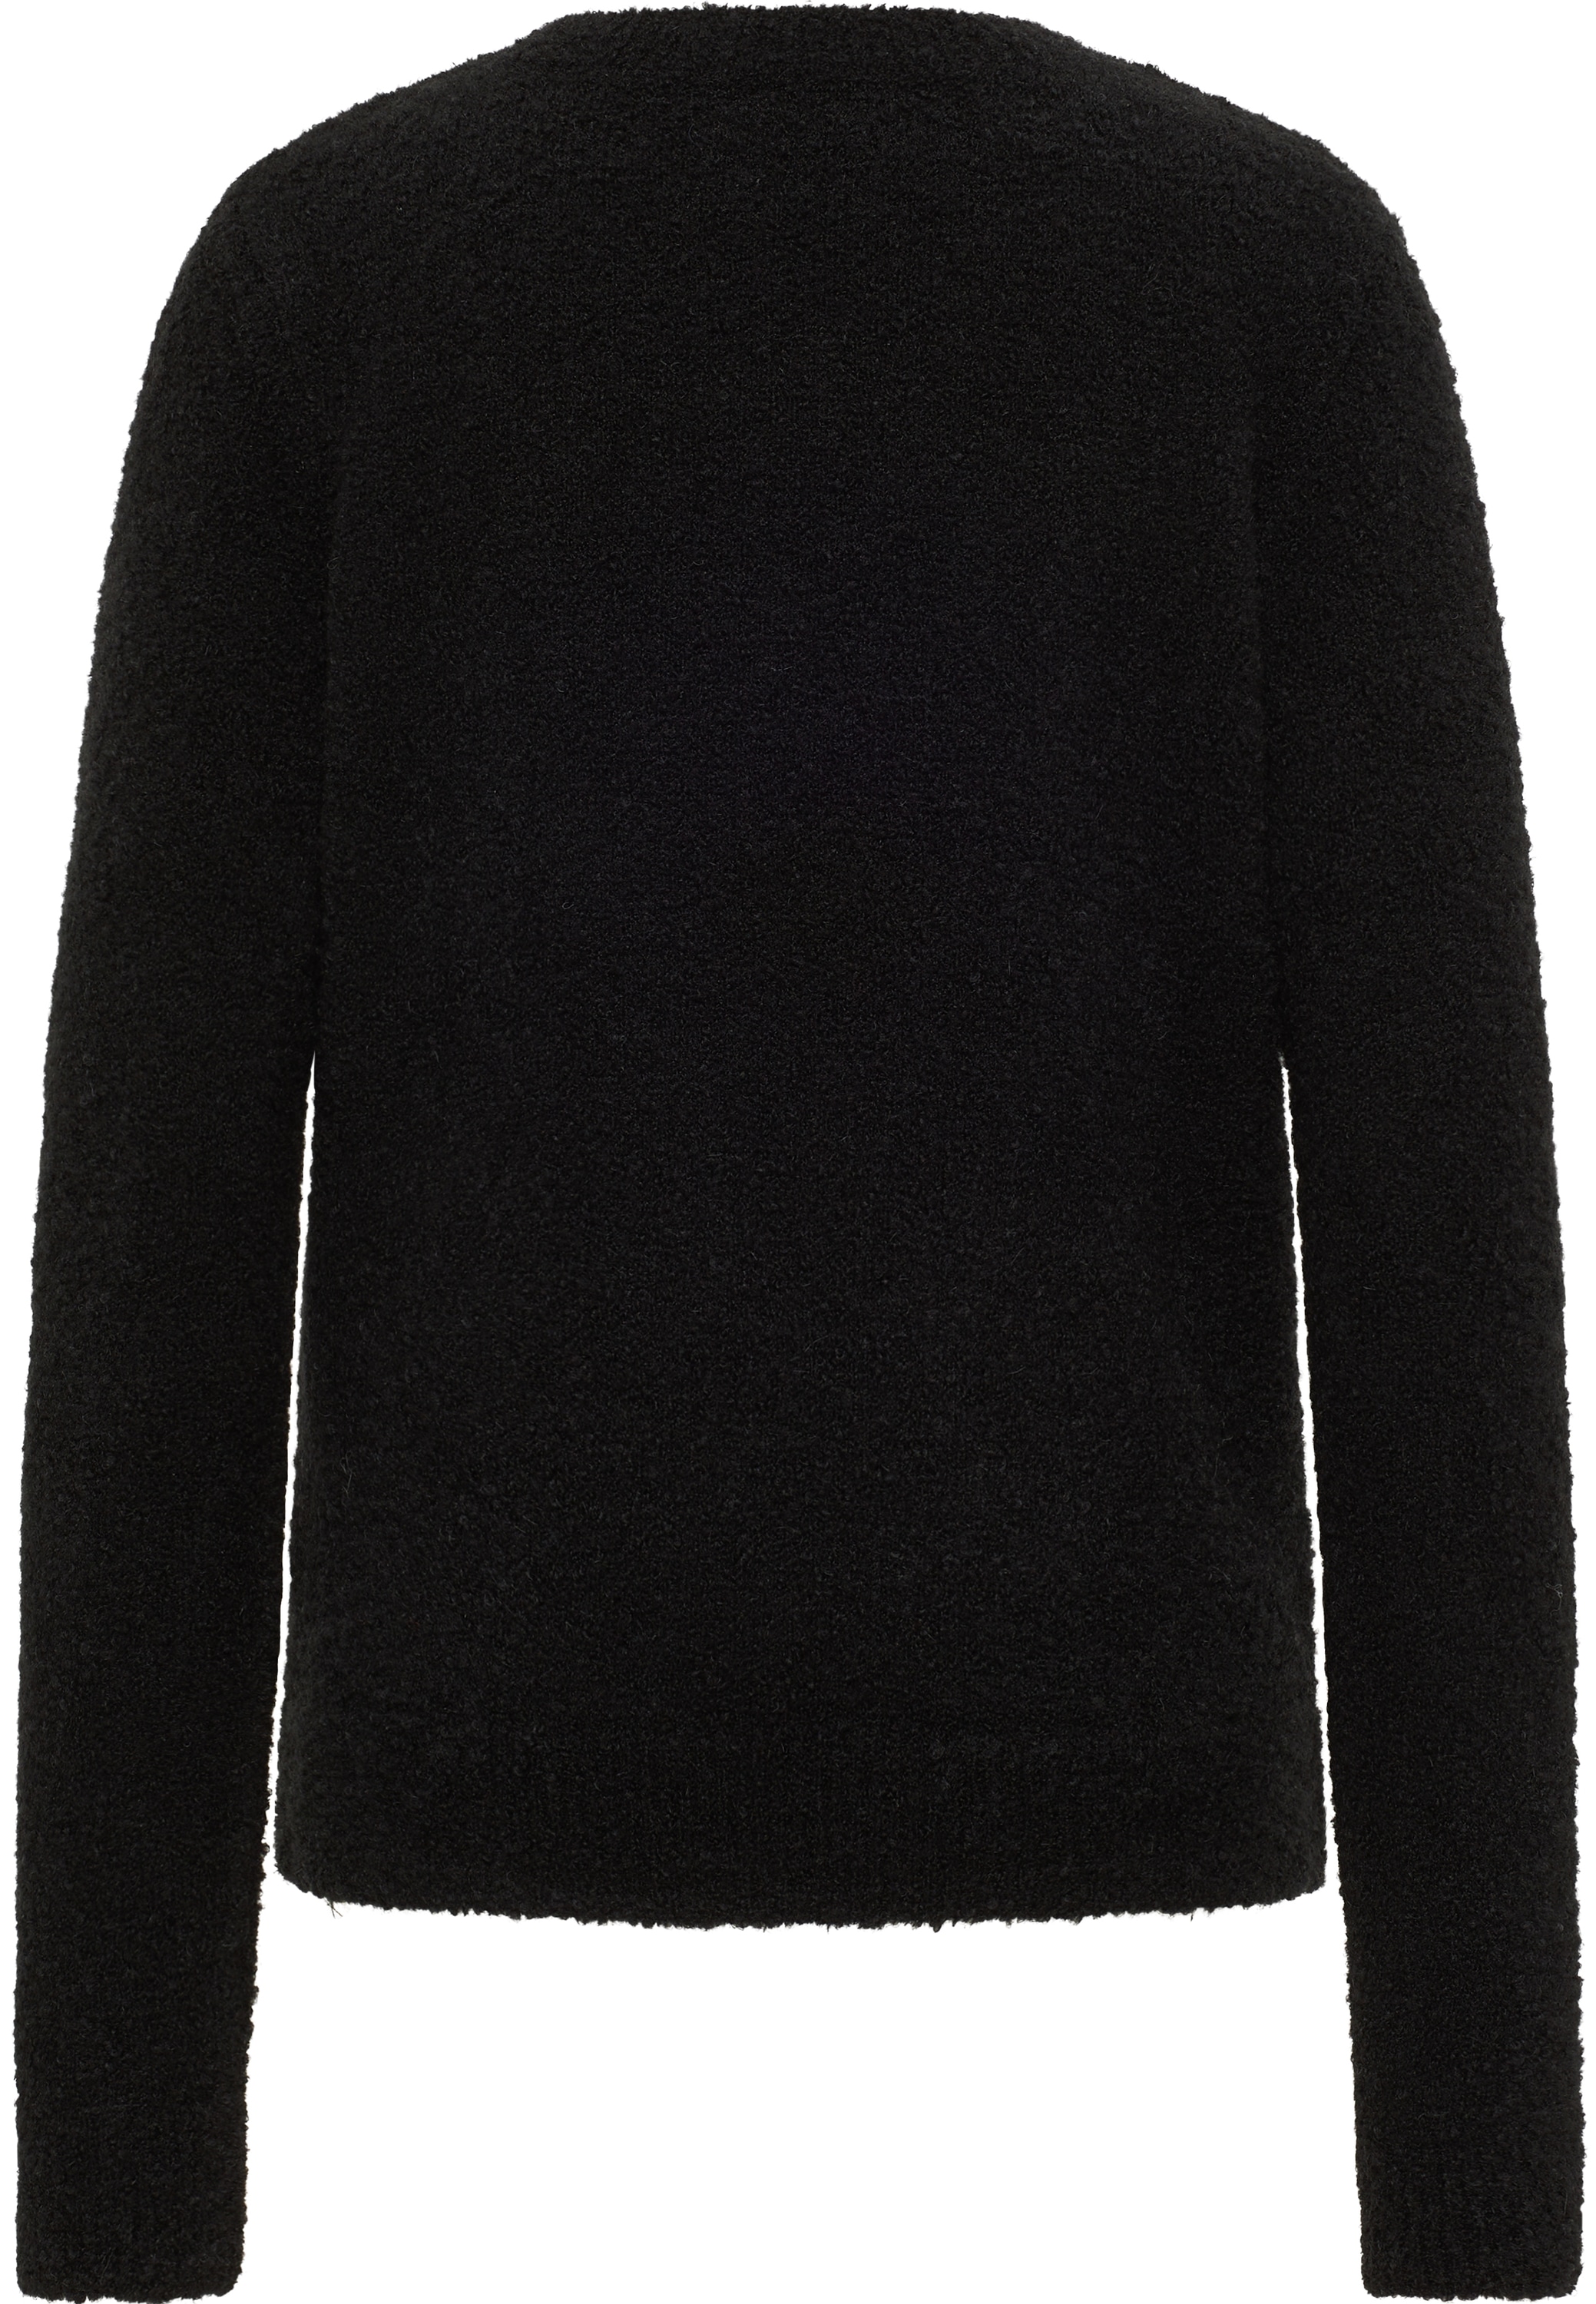 Sweater Shop MUSTANG OTTO Sweater Online »Mustang im Strickpullover«